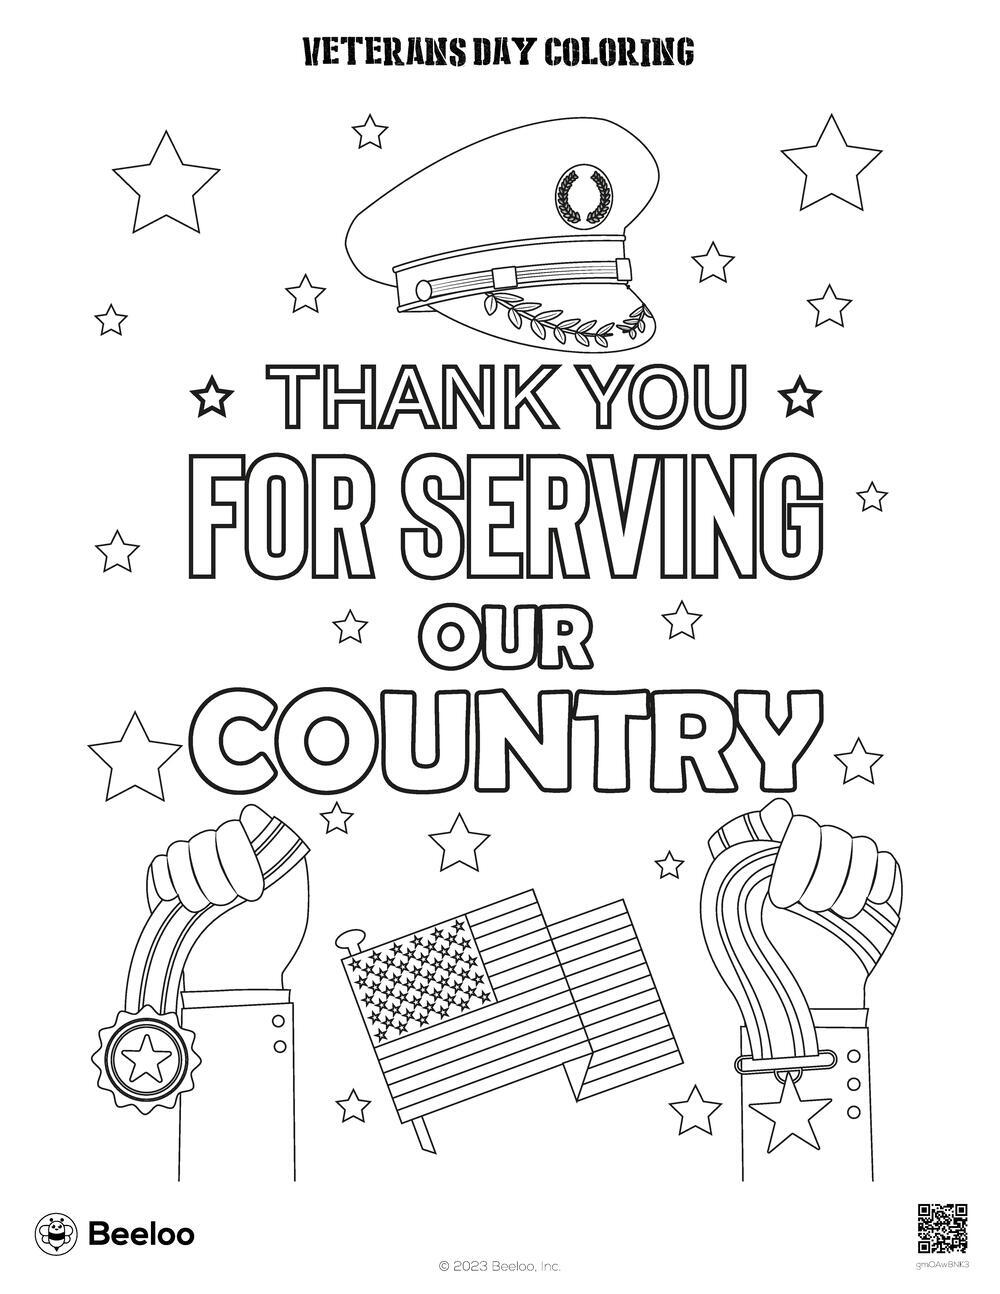 Veterans day coloring â printable crafts and activities for kids